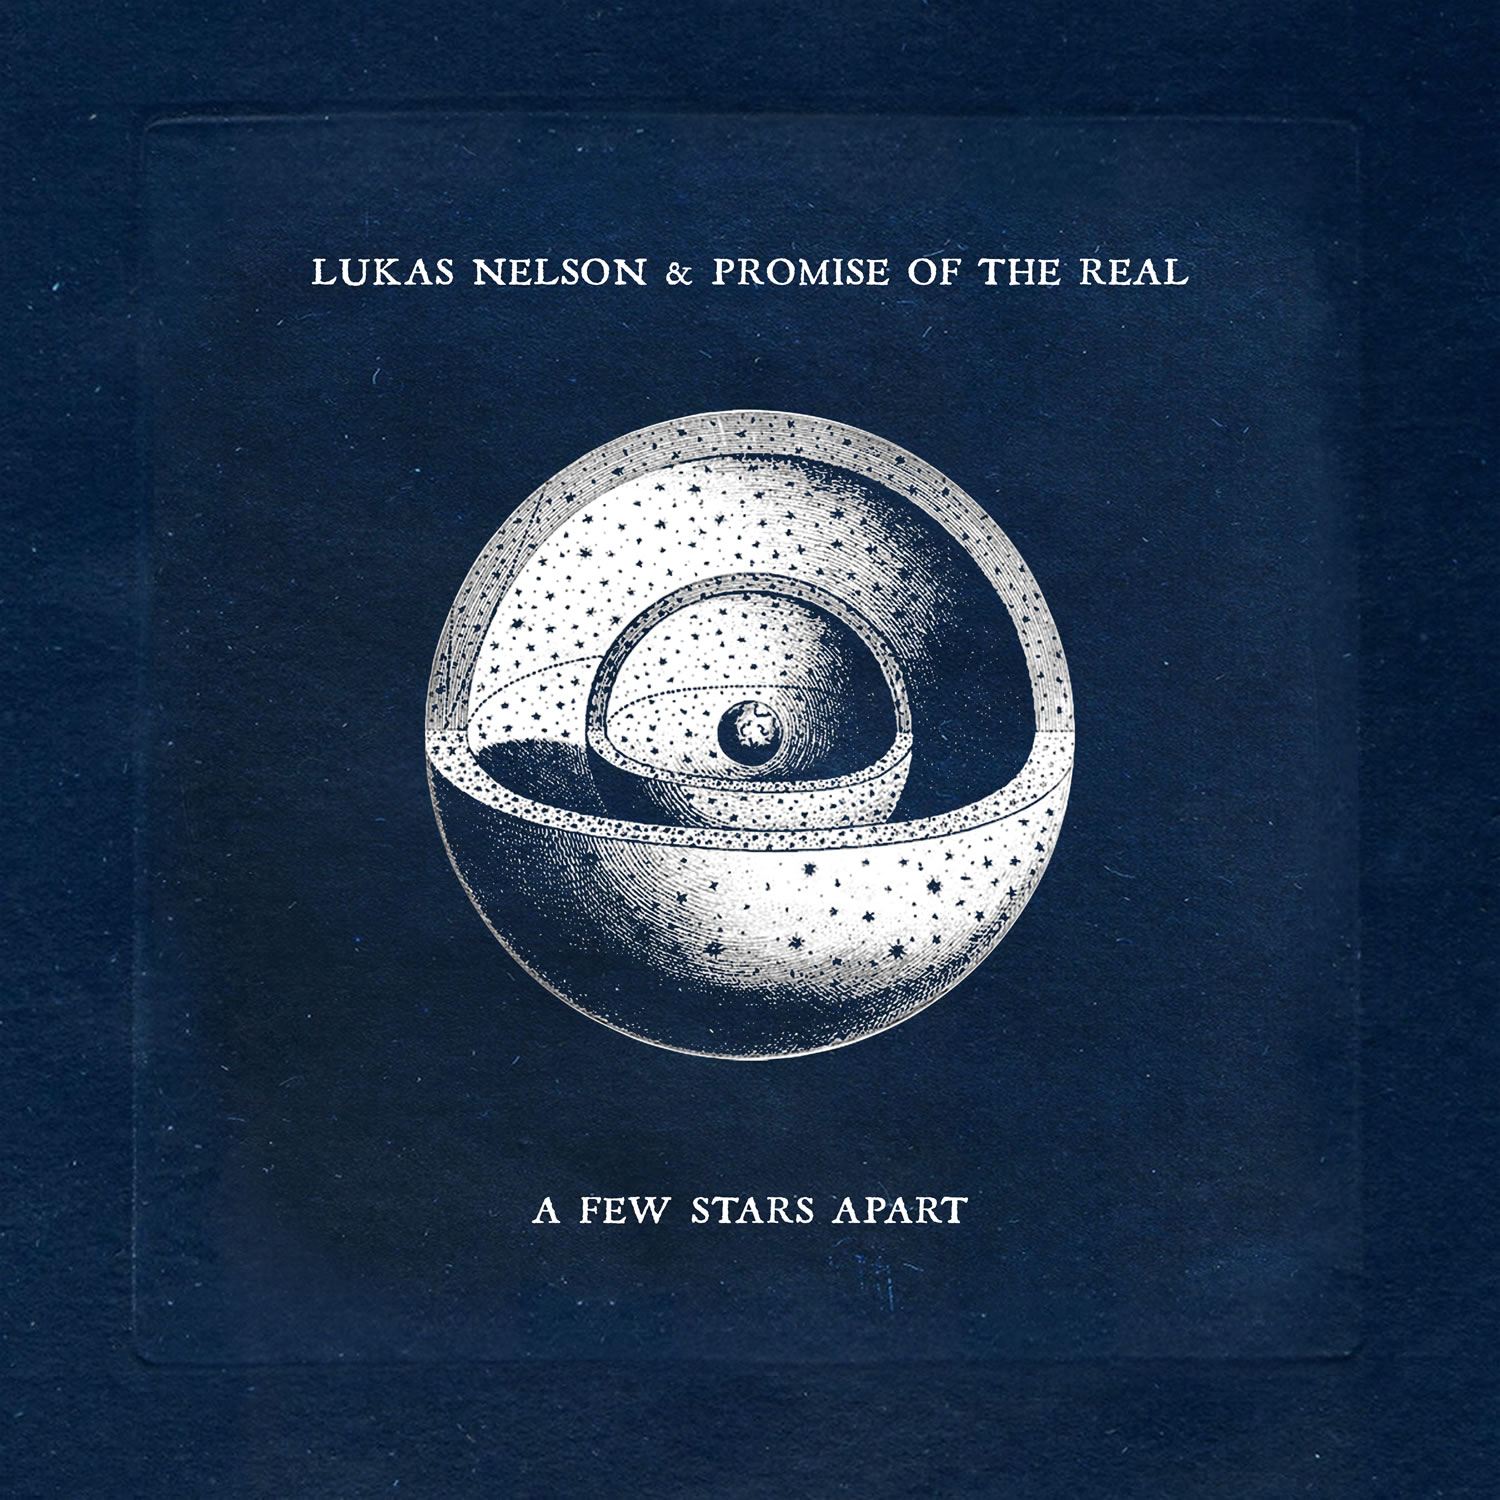 Lukas Nelson & Promise of the Real - A Few Stars Apart